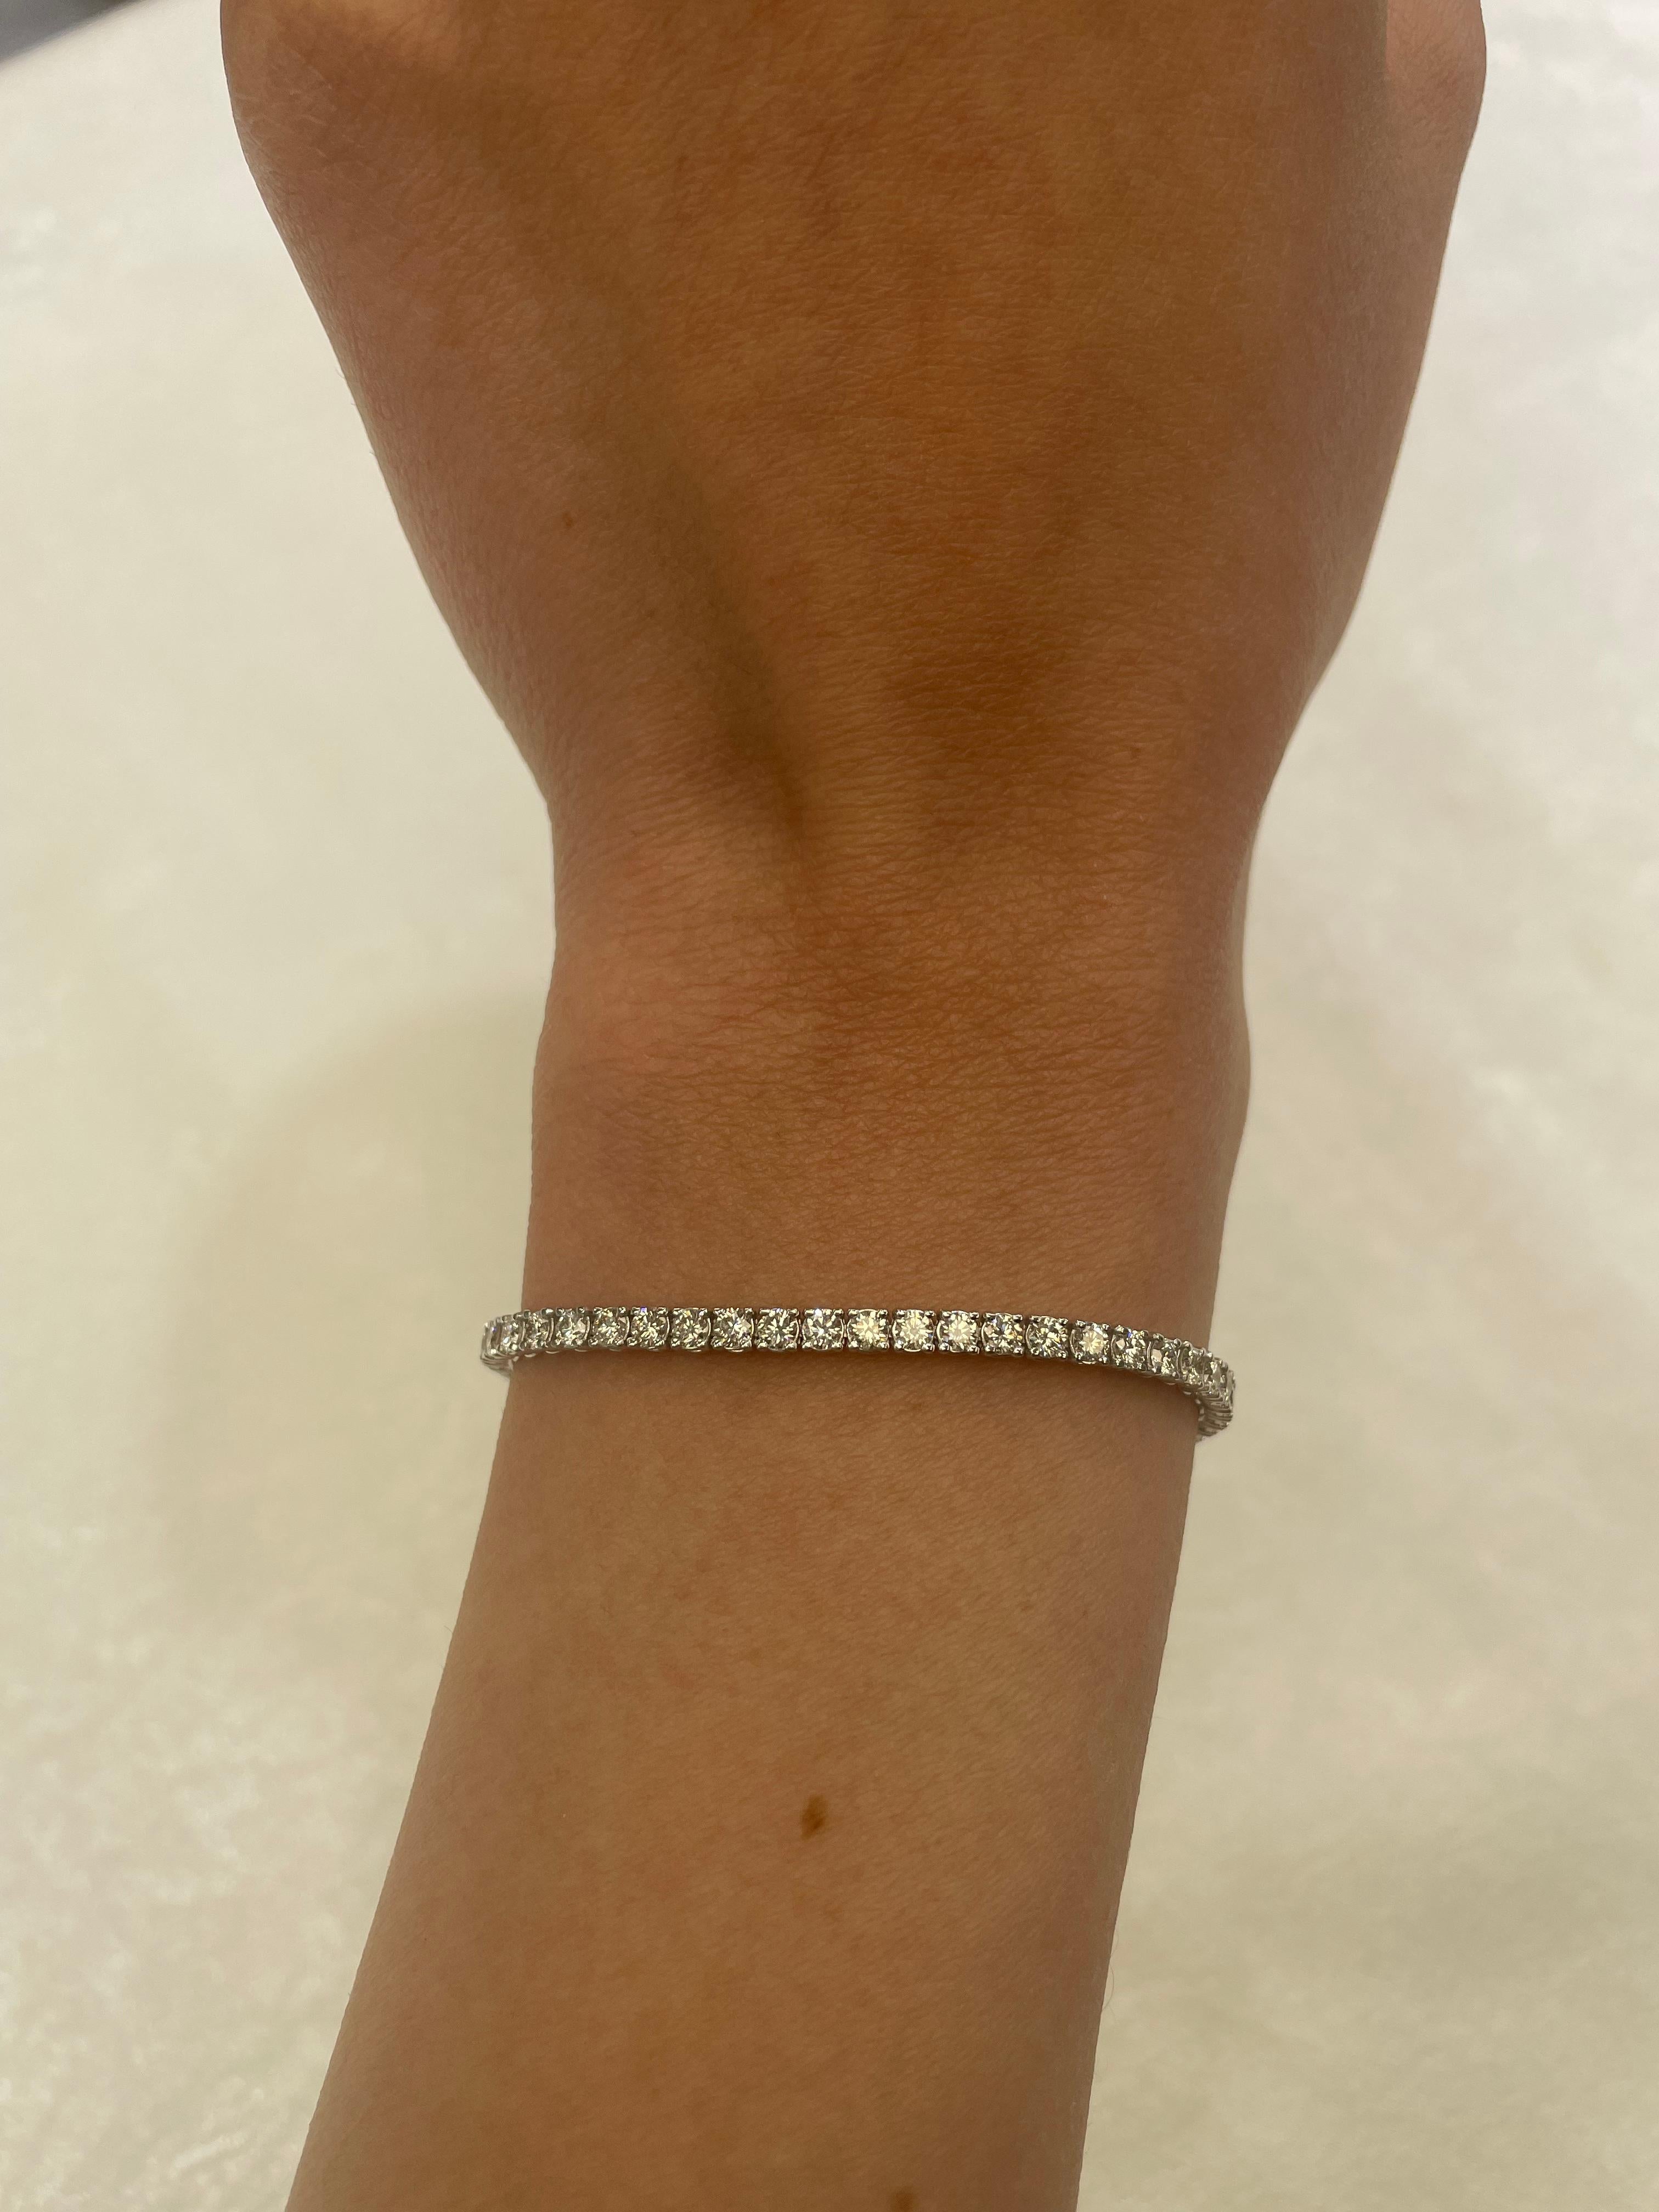 Exquisite and timeless diamonds tennis bracelet, by Alexander Beverly Hills.
66 round brilliant diamonds, 3.56 carats total. Approximately F/G color and VS clarity. Four prong set in 14k white gold, 7.47 grams, 7 inches. 
Accommodated with an up to